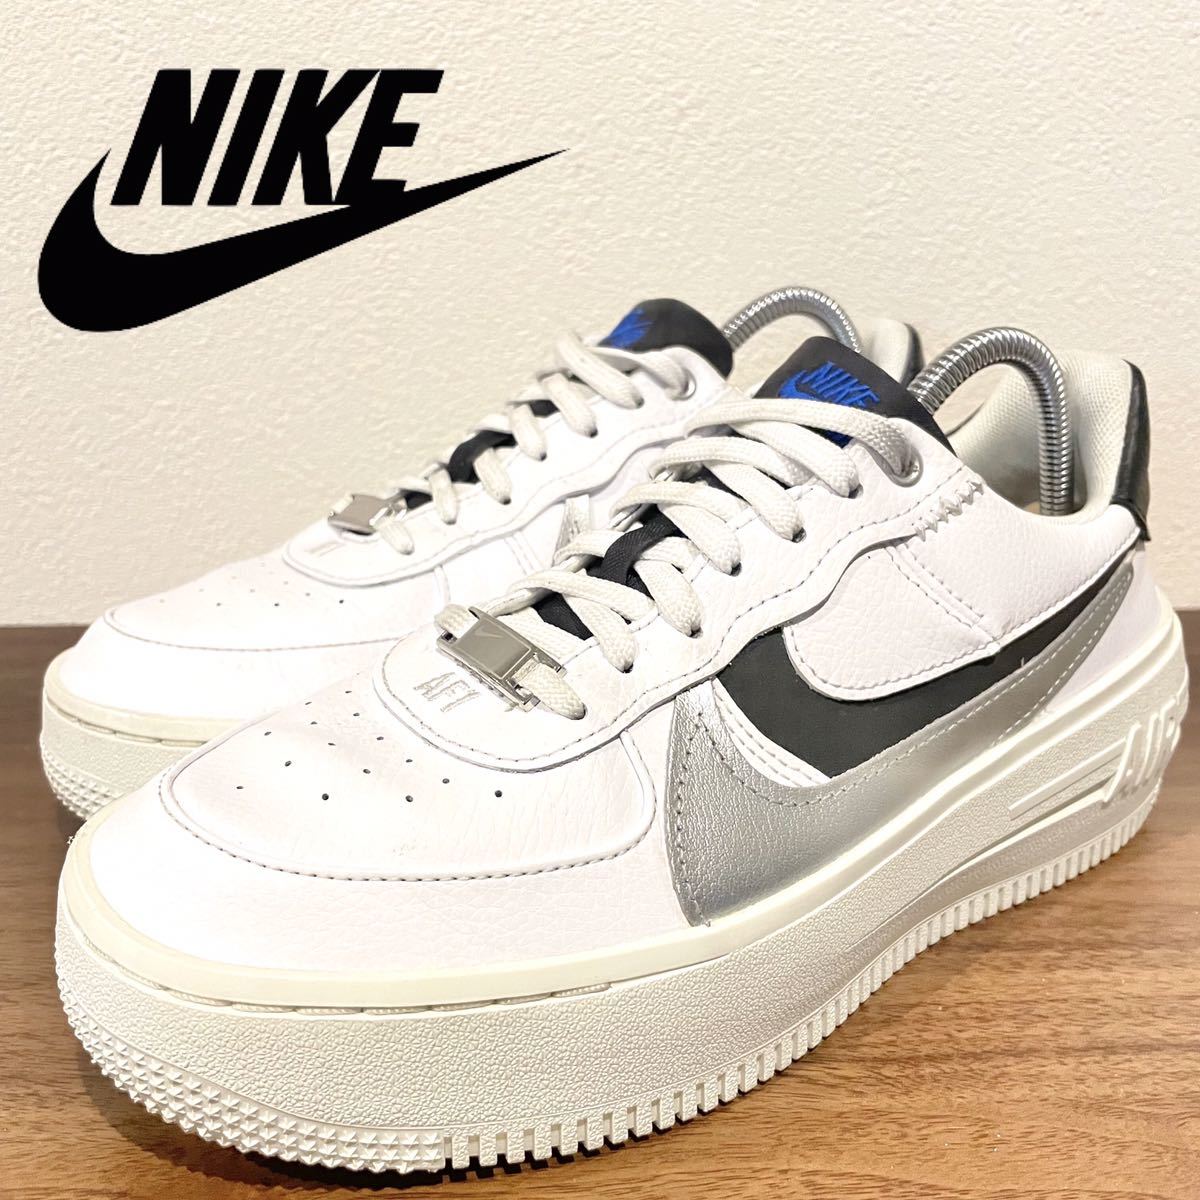 NIKE AIR FORCE 1 PLT AF ORM LV8 WHITE｜PayPayフリマ